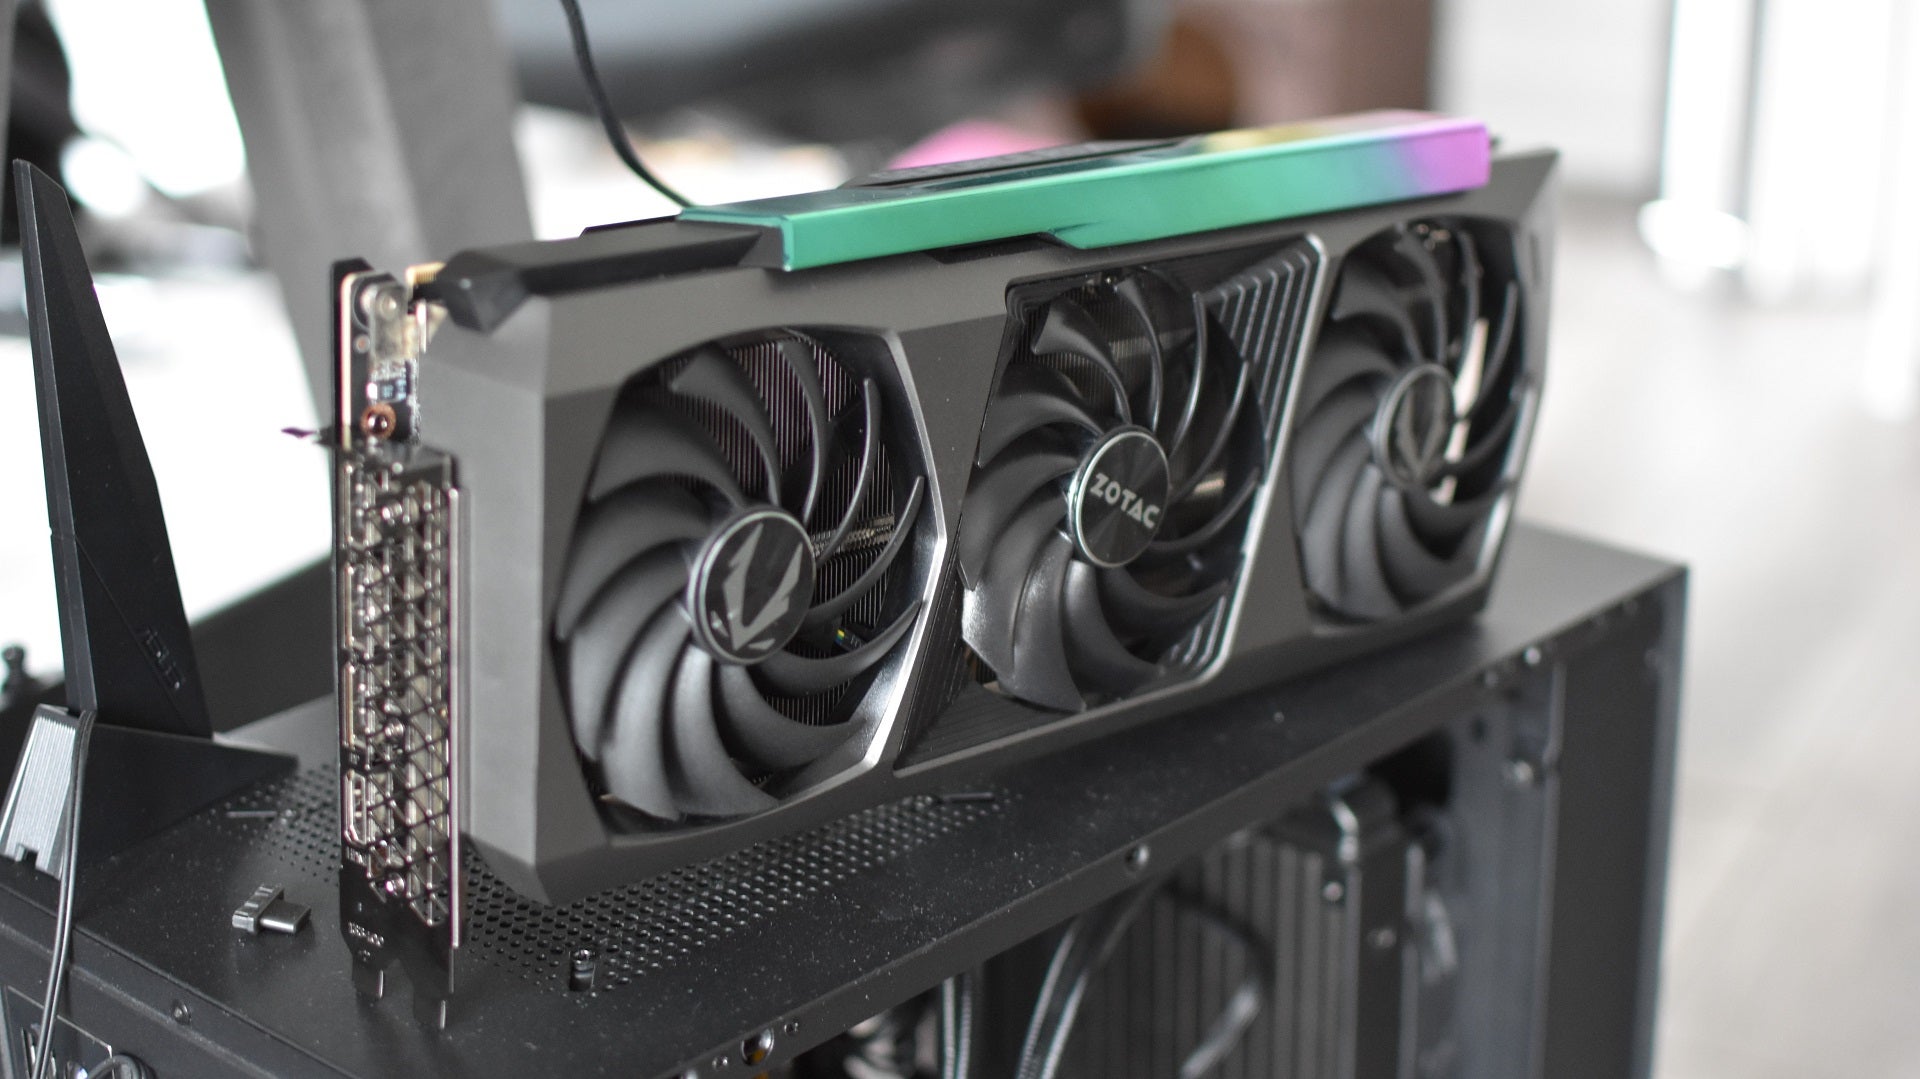 The Zotac GeForce RTX 3090 Ti AMP Extreme Holo graphics card sat on top of a PC case.